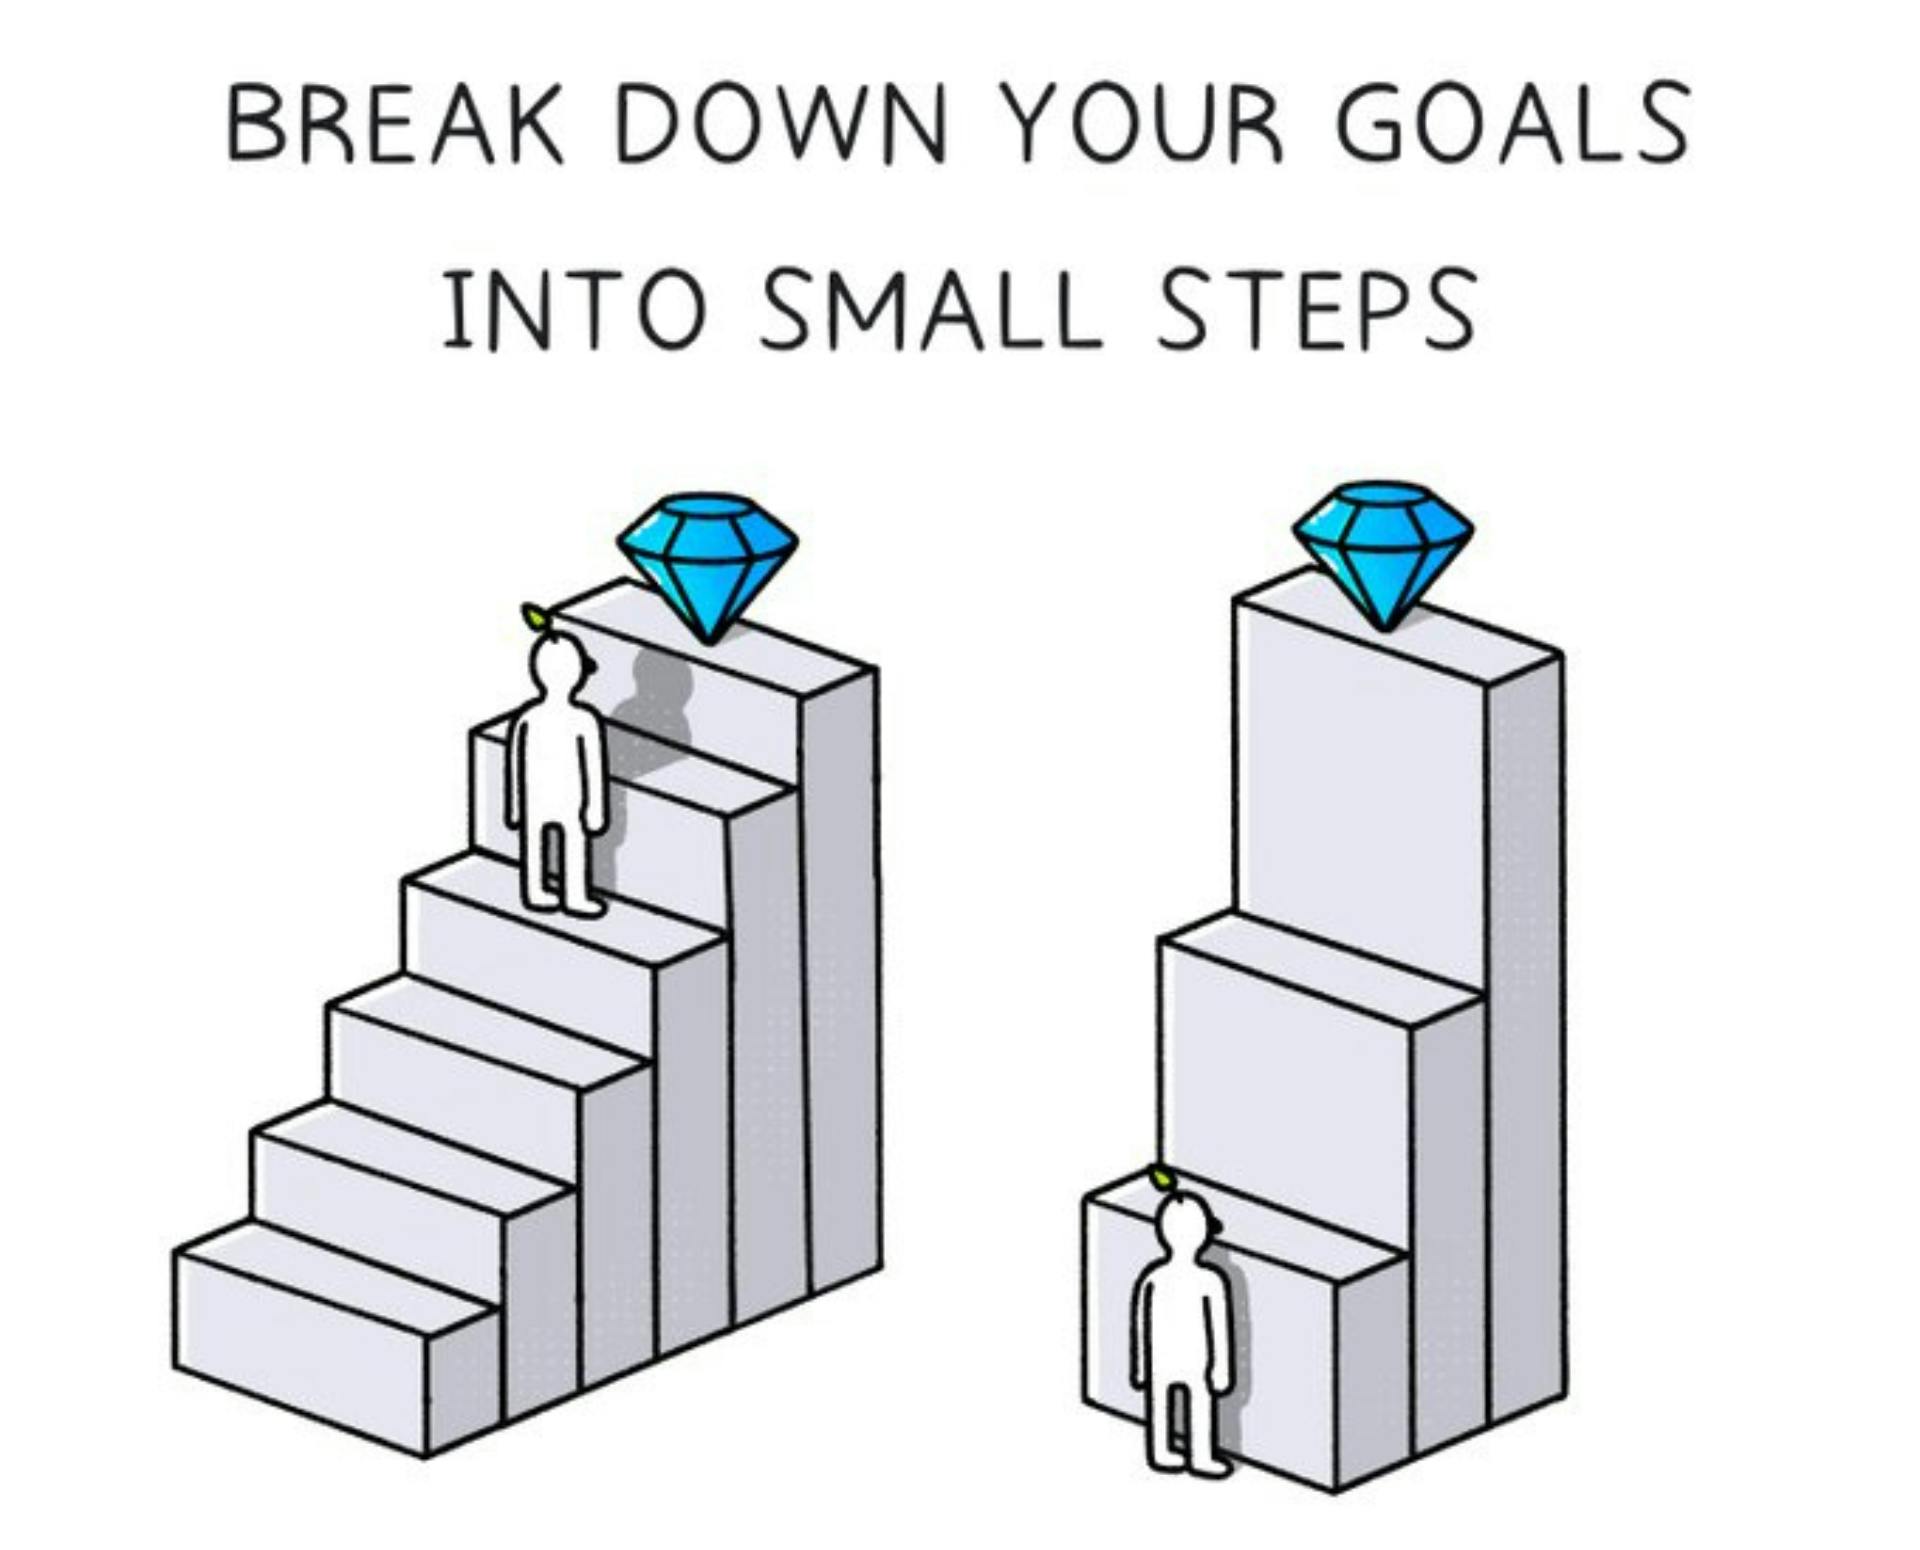 Break down your goals into small steps with illustration